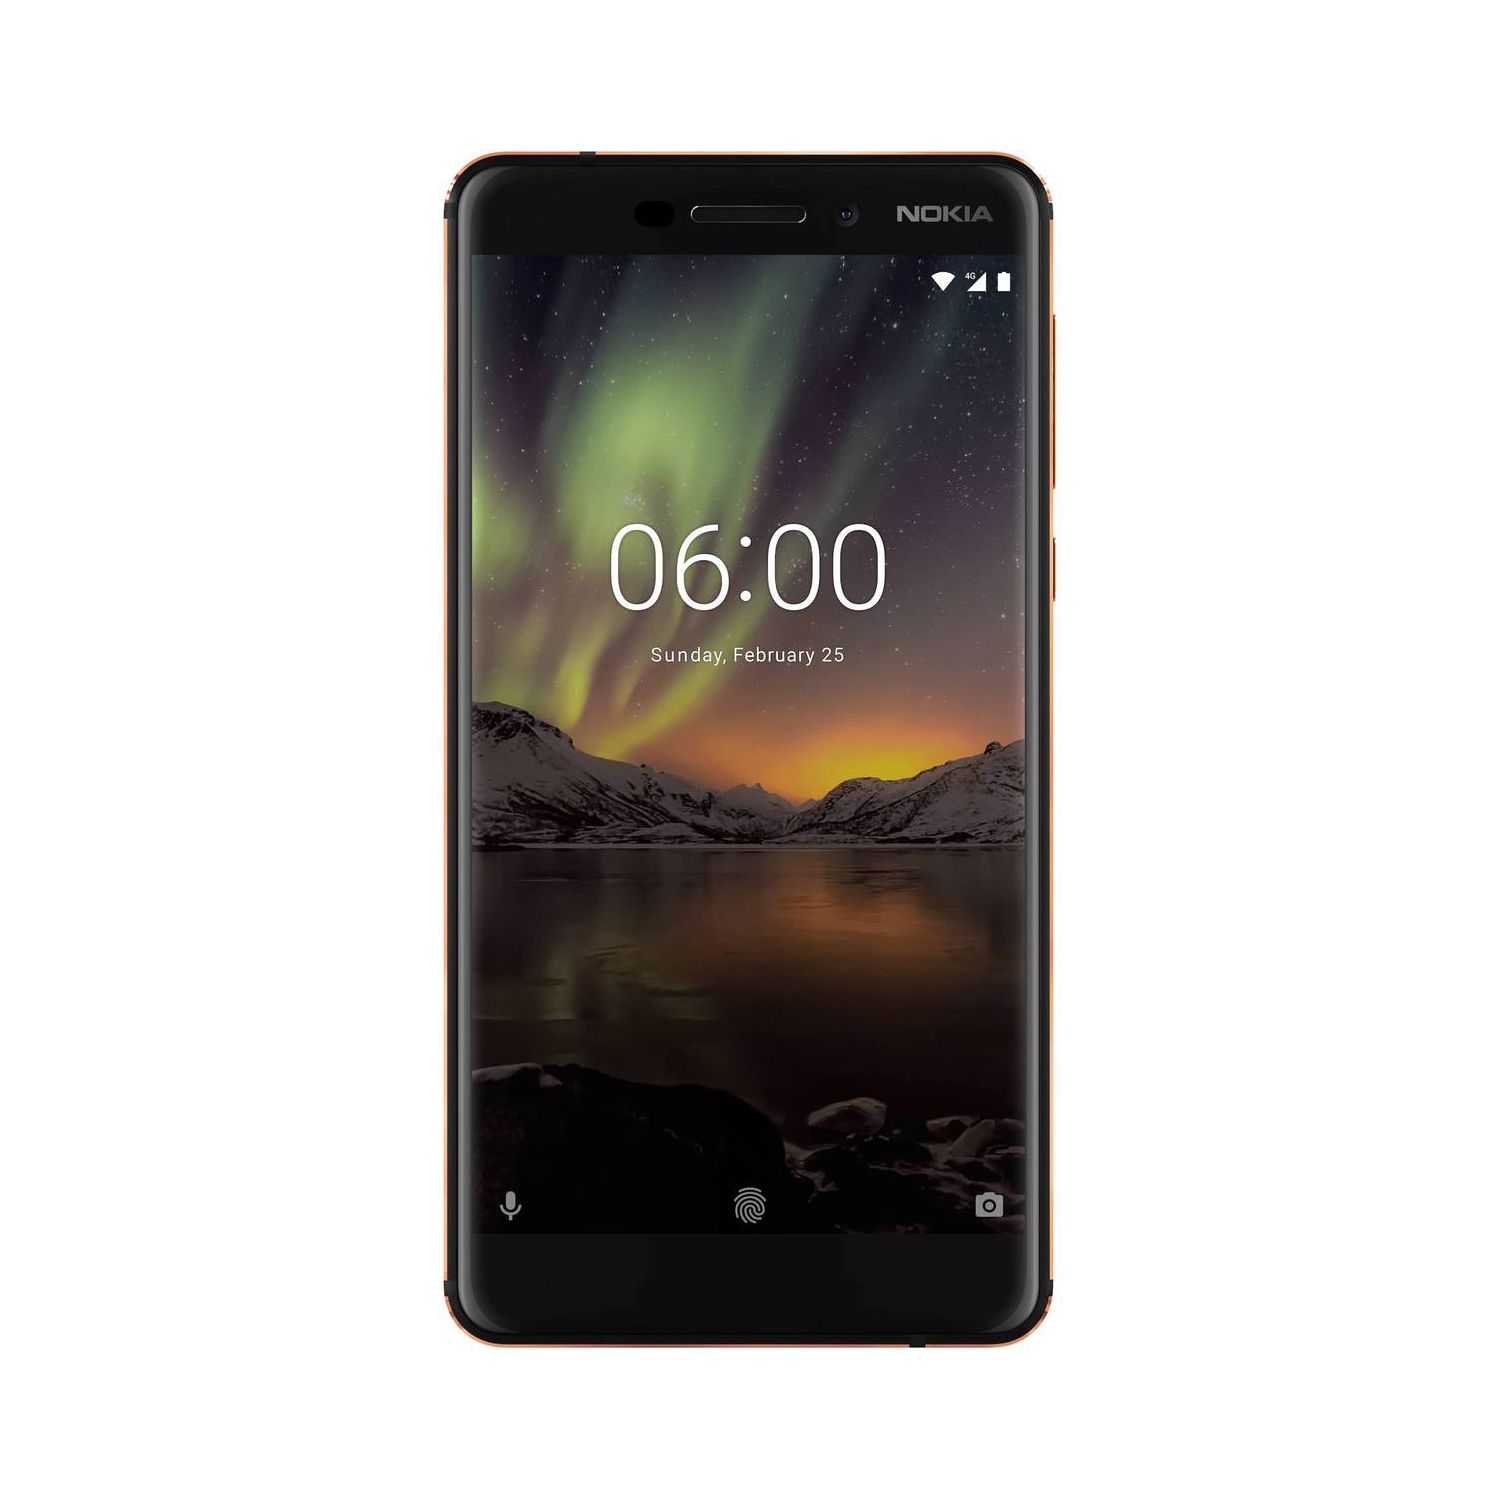 Nokia 6.1 (2018) - 32GB Smartphone - Copper/Black - Factory Unlocked - Certified Pre-Owned